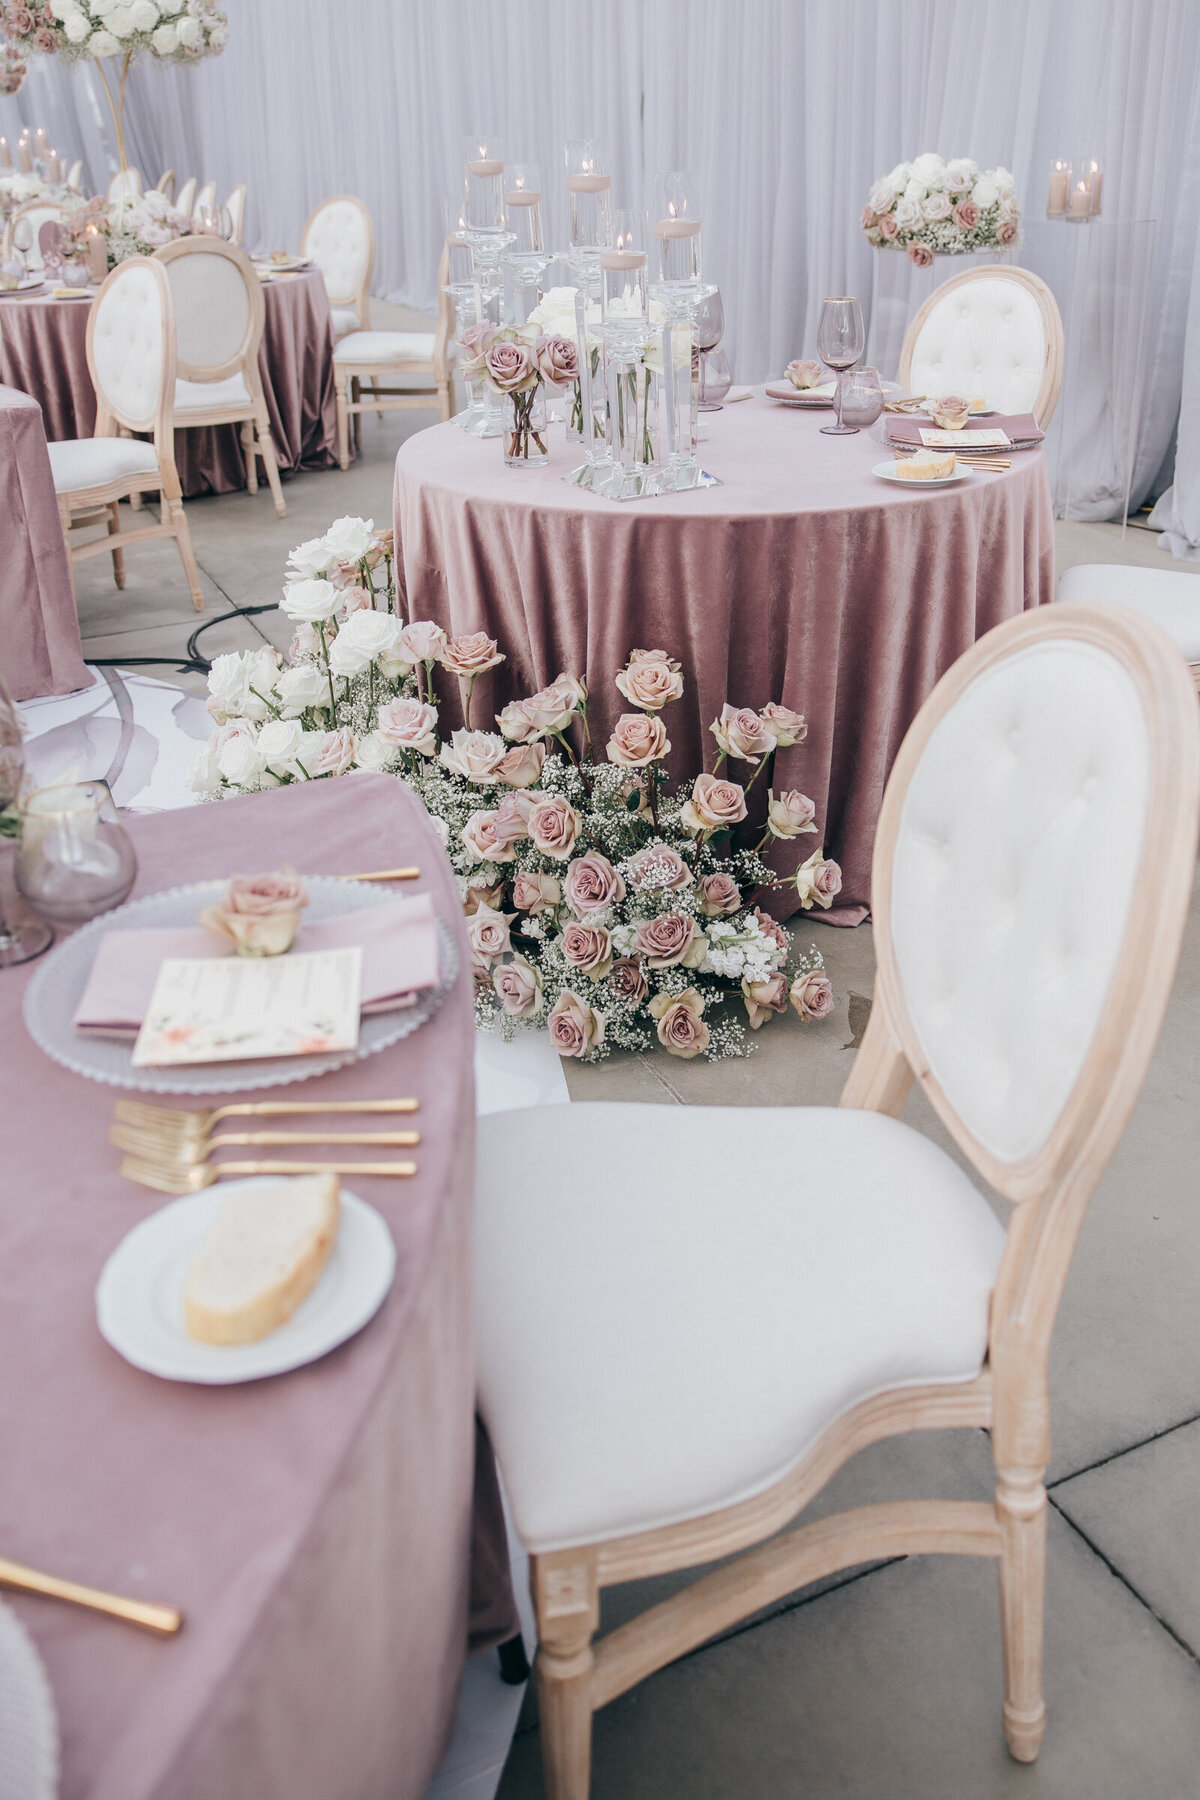 Luxurious wedding dinner with crystal candlesticks and blush roses